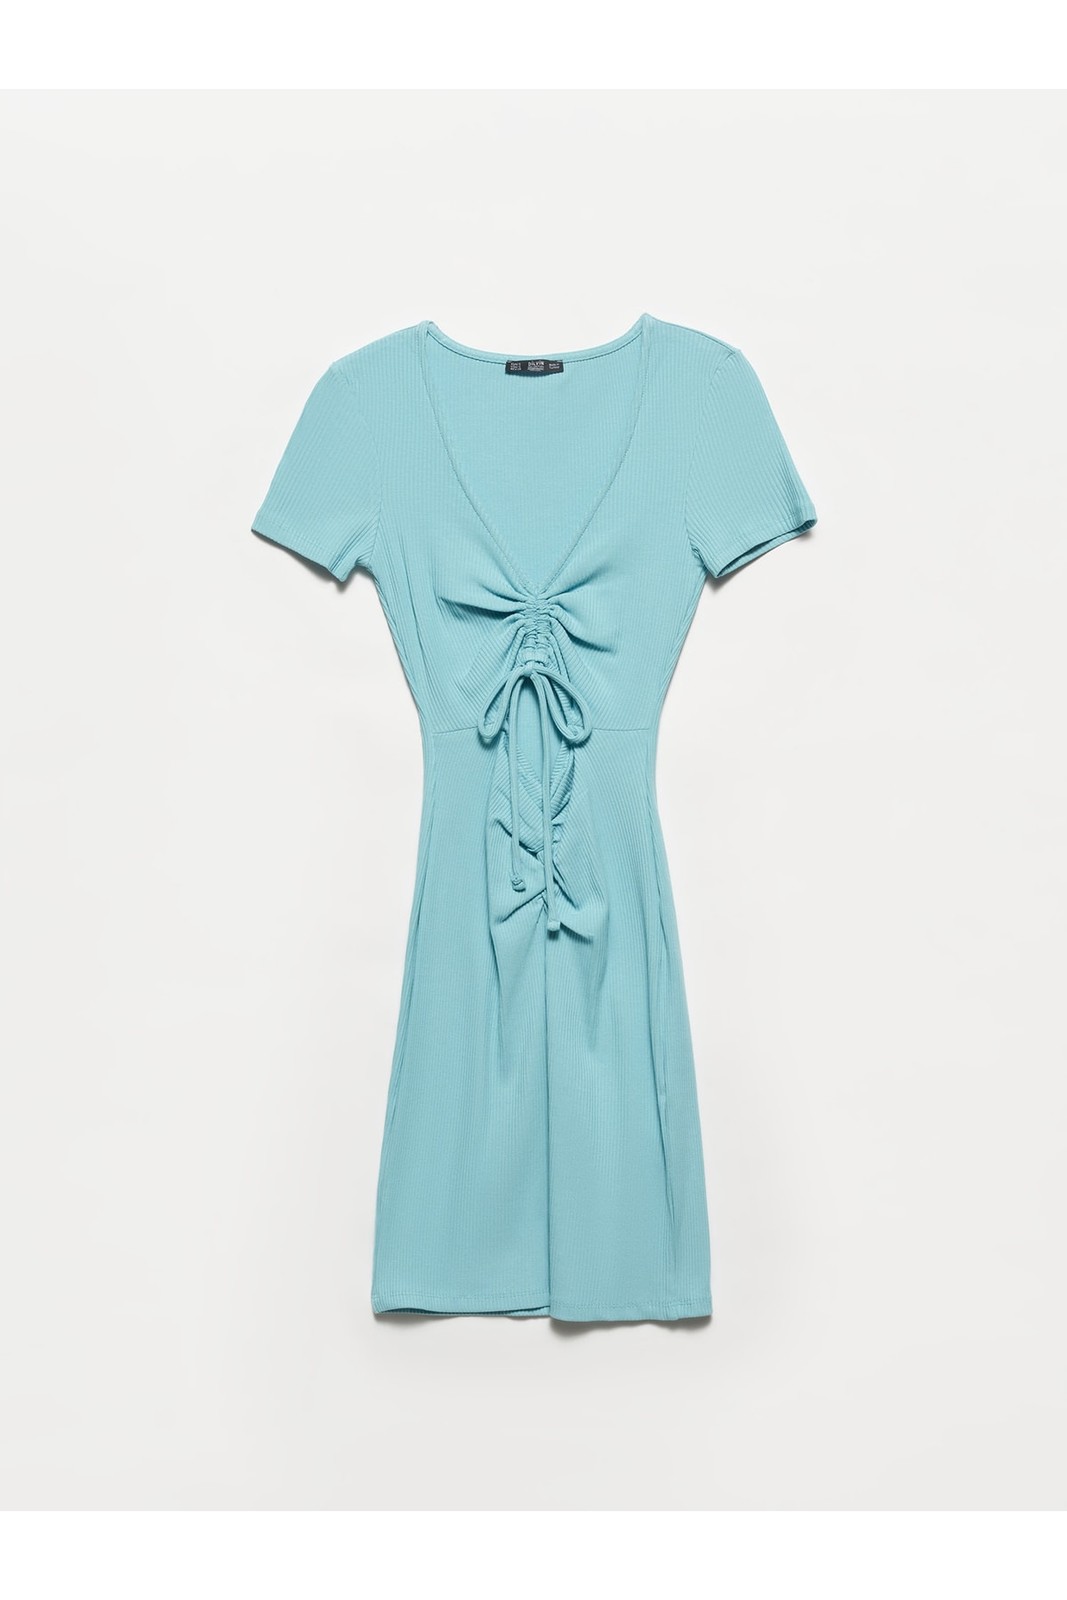 Dilvin 9133 V-Neck Dress with Pleated Front-turquoise